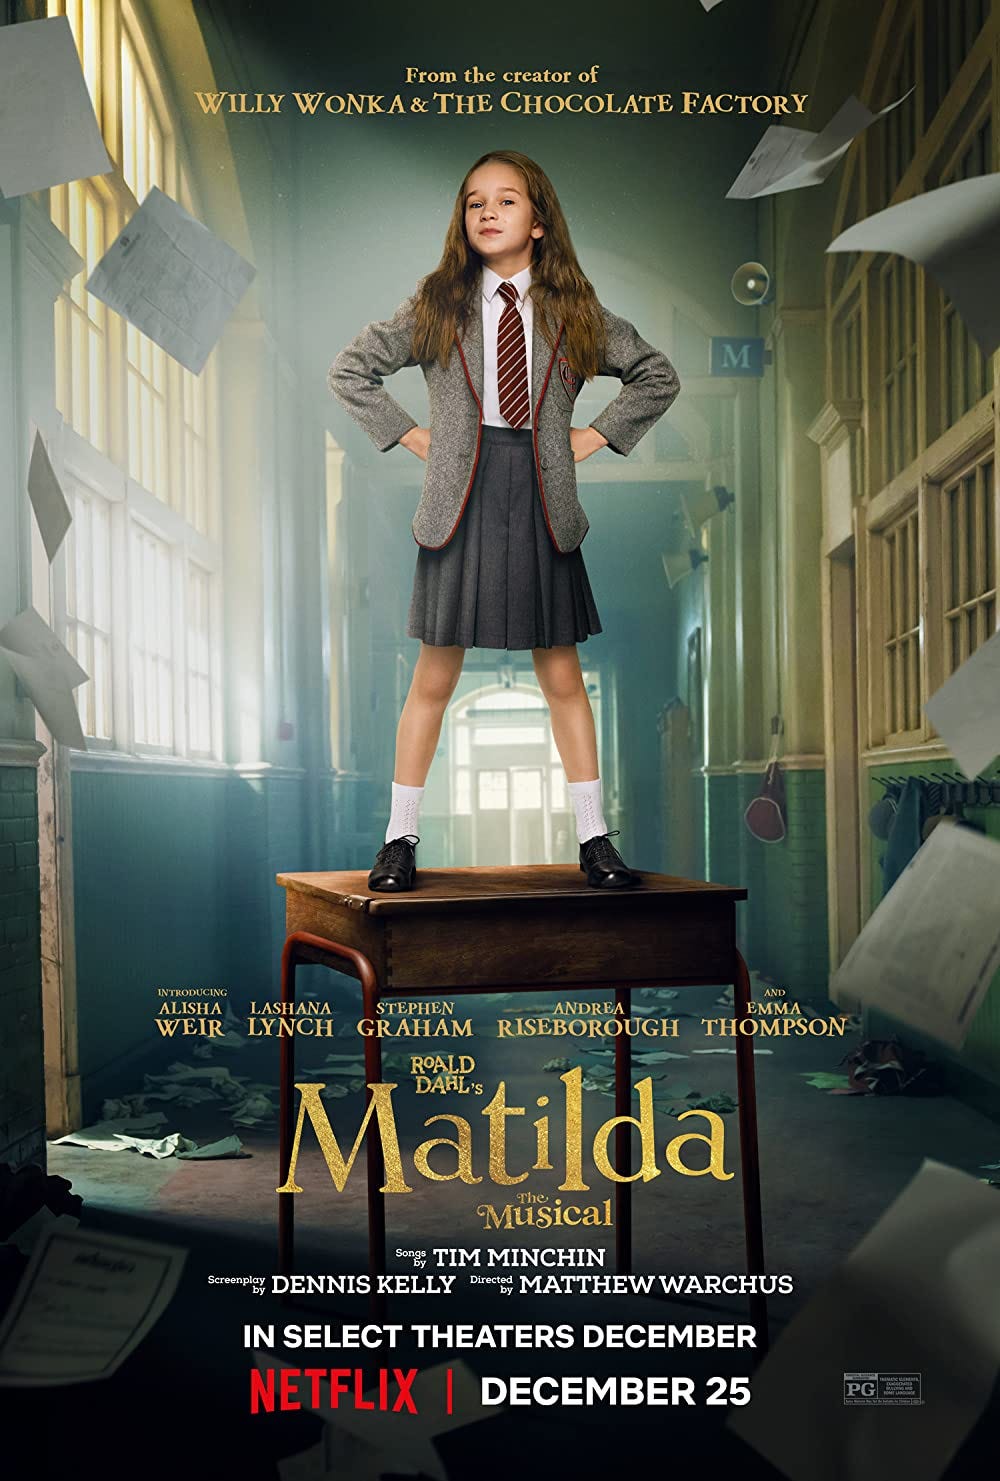 The movie poster for the new Matilda musical film